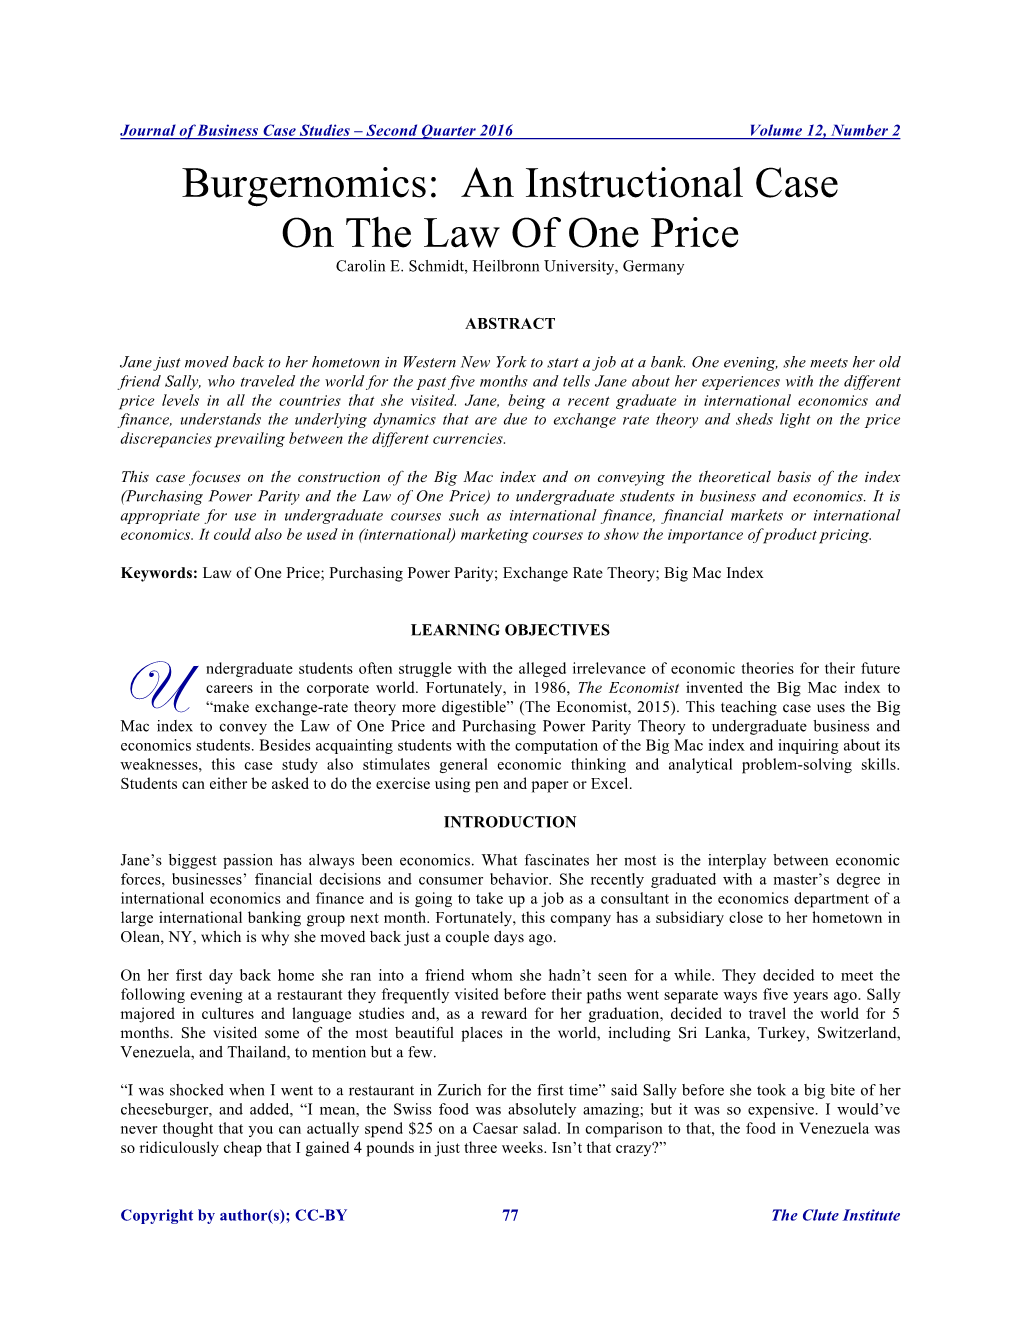 Burgernomics: an Instructional Case on the Law of One Price Carolin E